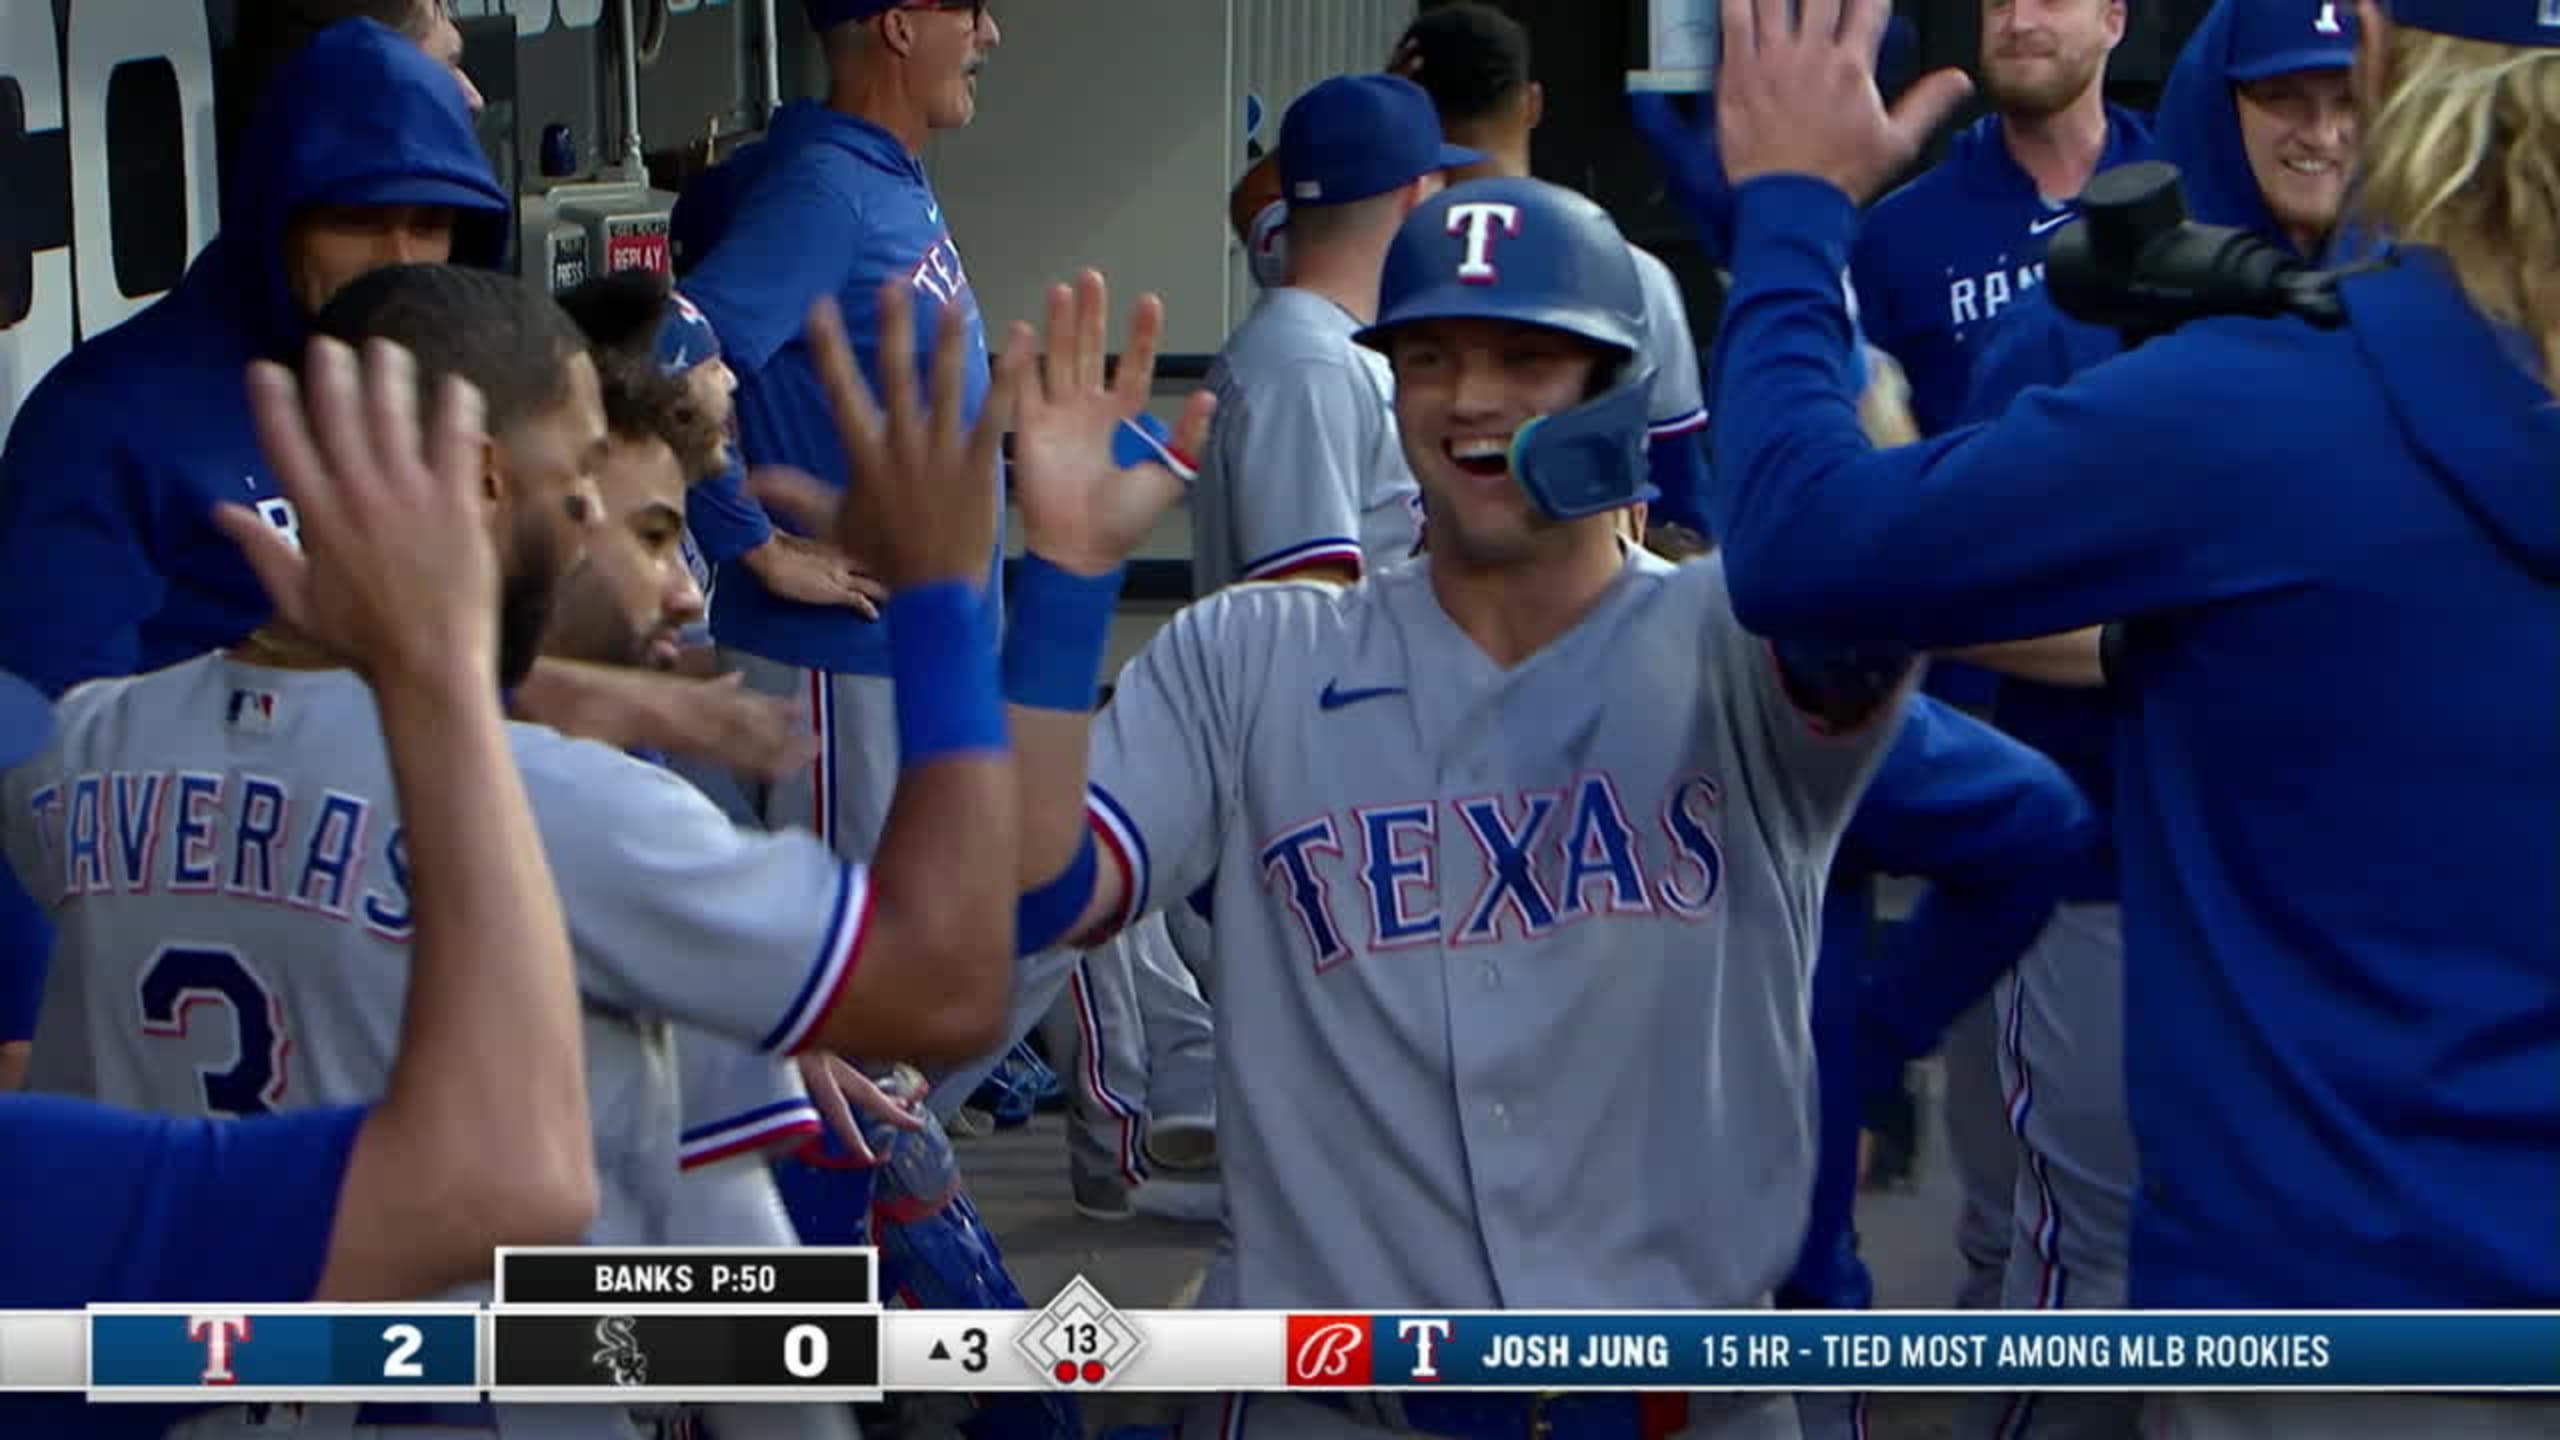 Josh Jung hits his 3rd HR of the year to make it 3-0 Rangers in